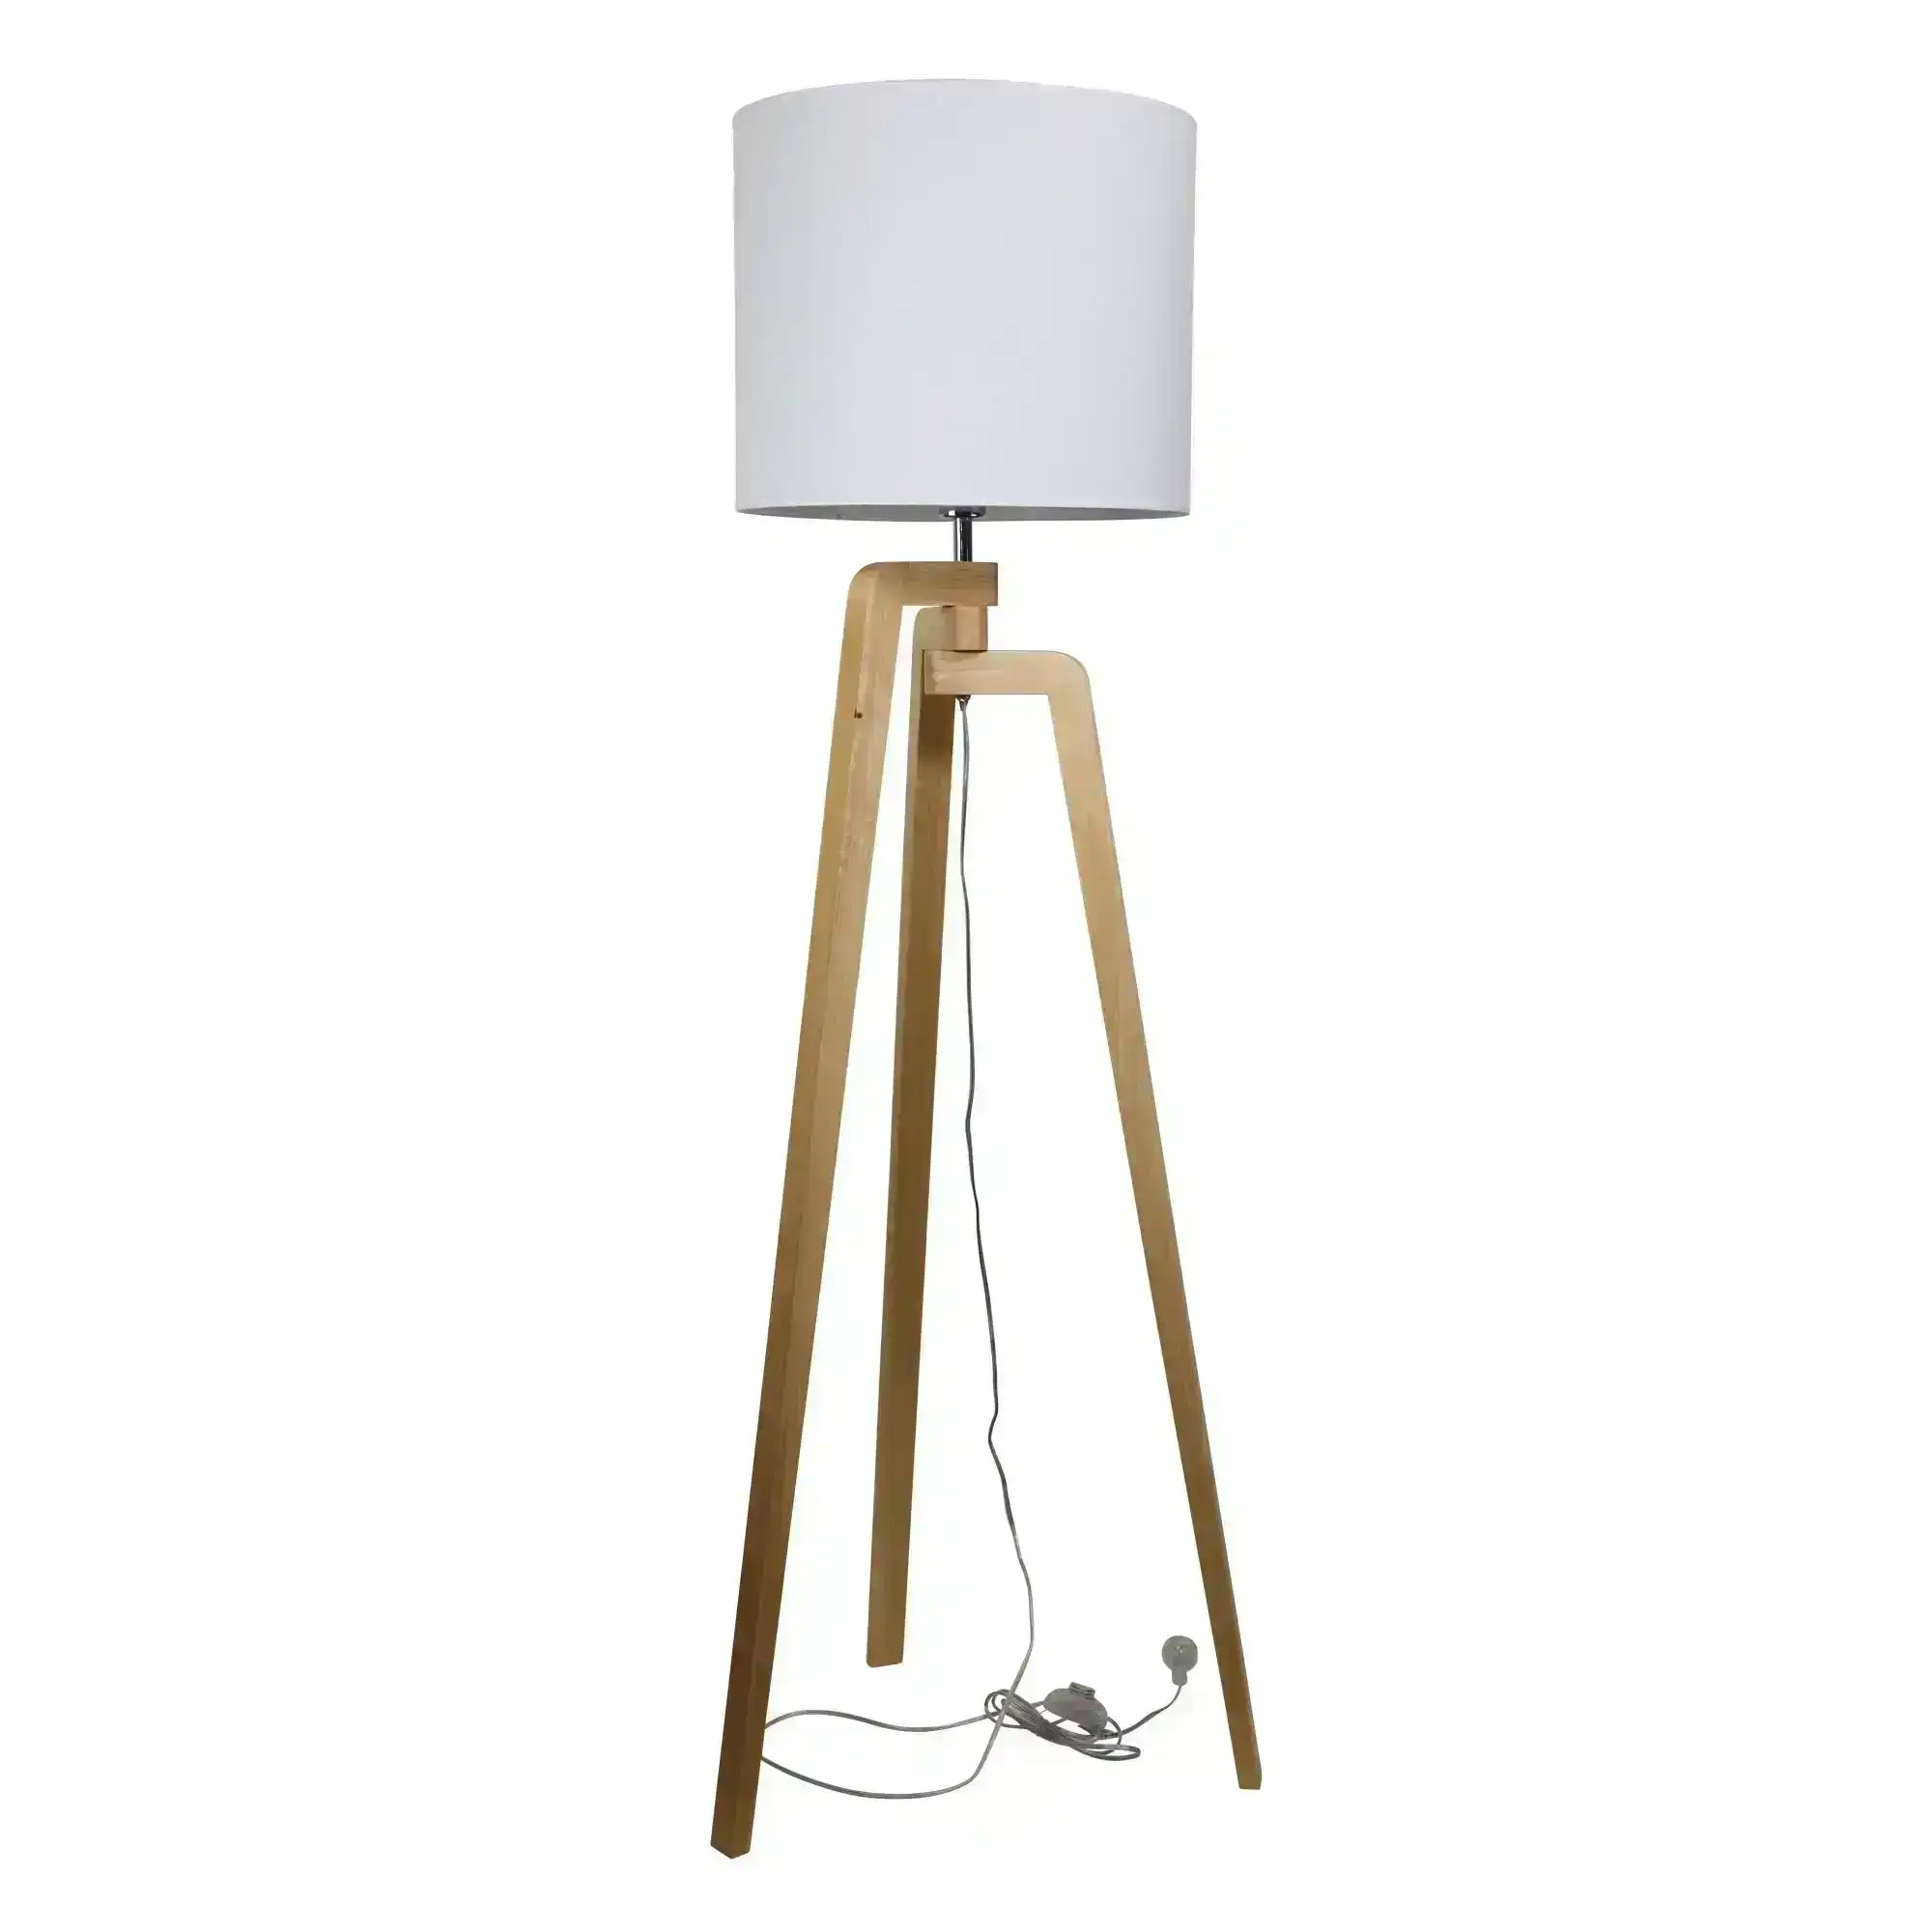 LUND FLOOR LAMP Scandi Inspired Timber Tripod Lamp with Shade